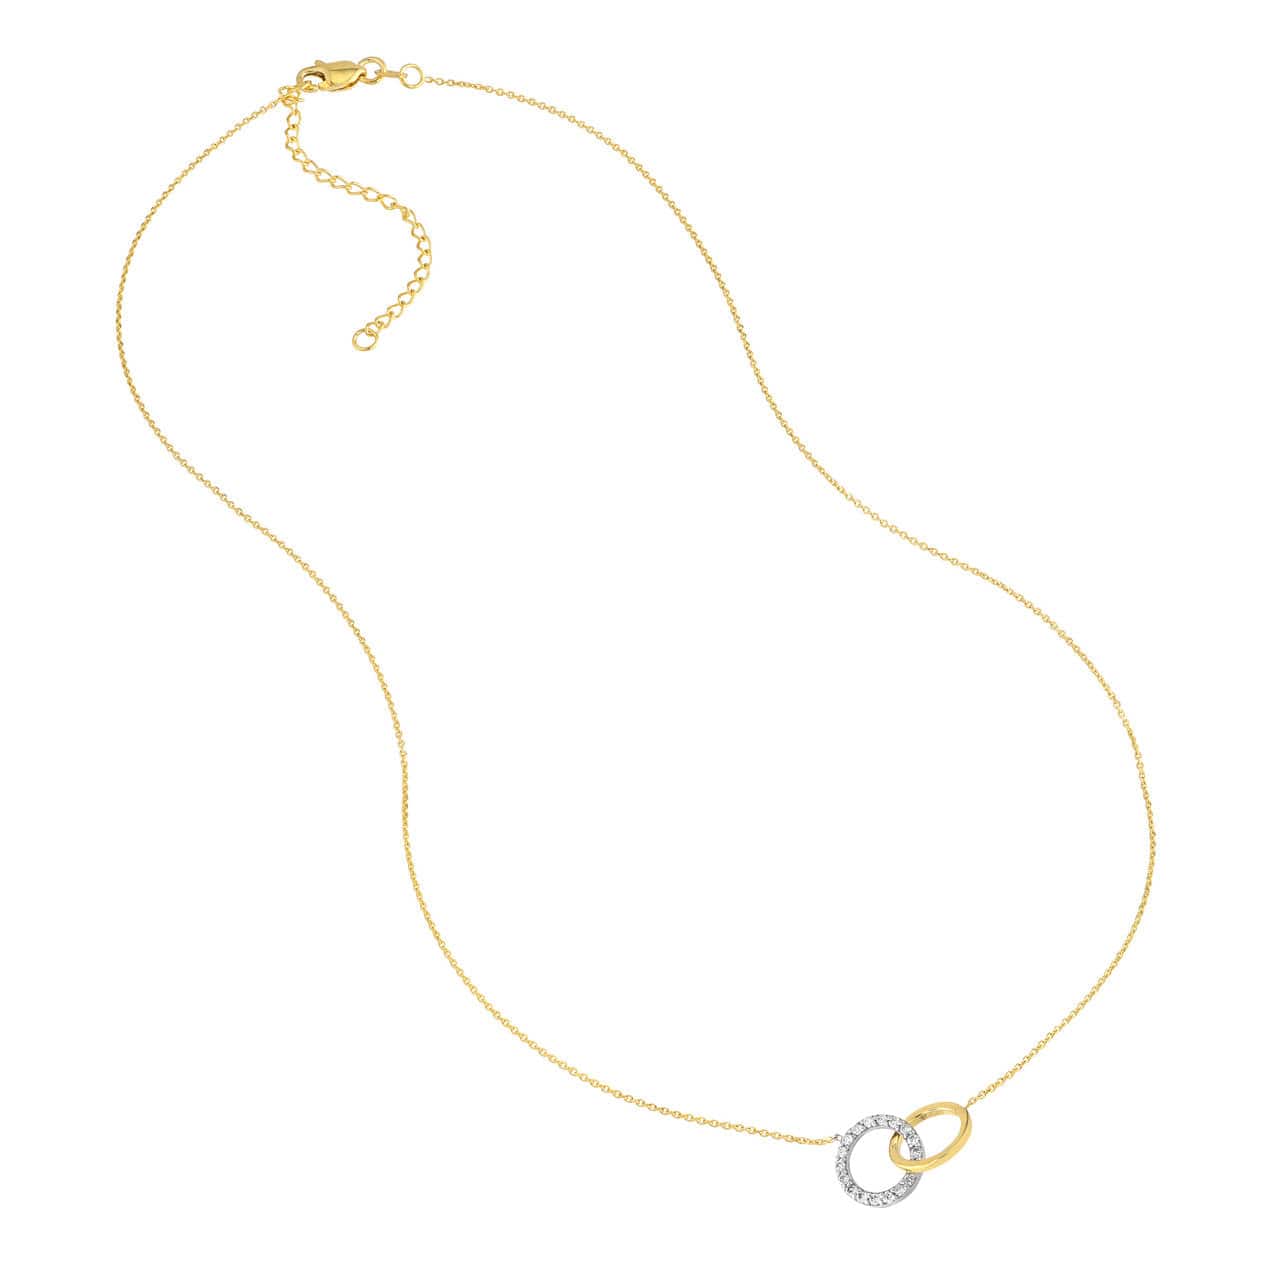 Adjustable 14K Adjustable Intertwined Two-Toned Diamond Circles Necklace